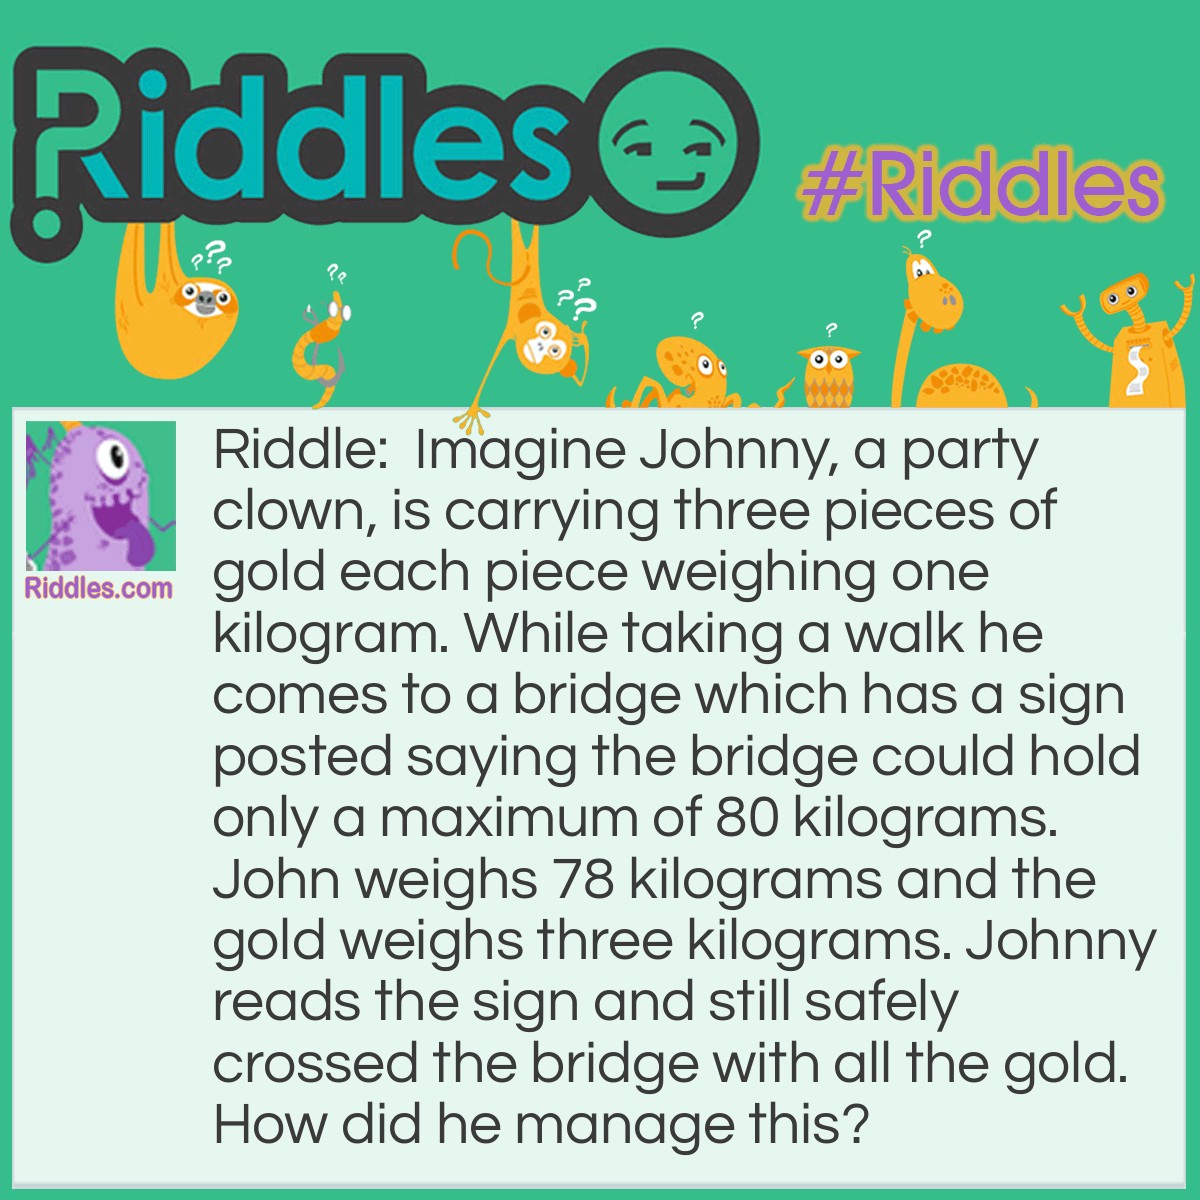 Riddle: Imagine Johnny, a party clown, is carrying three pieces of gold each piece weighing one kilogram. While taking a walk he comes to a bridge that has a sign posted saying the bridge could hold only a maximum of 80 kilograms. John weighs 78 kilograms and the gold weighs three kilograms. Johnny reads the sign and still safely crossed the bridge with all the gold. How did he manage this? Answer: Johnny is a clown so he has mastered juggling. When he came to the bridge he juggled the gold, always keeping one piece in the air.